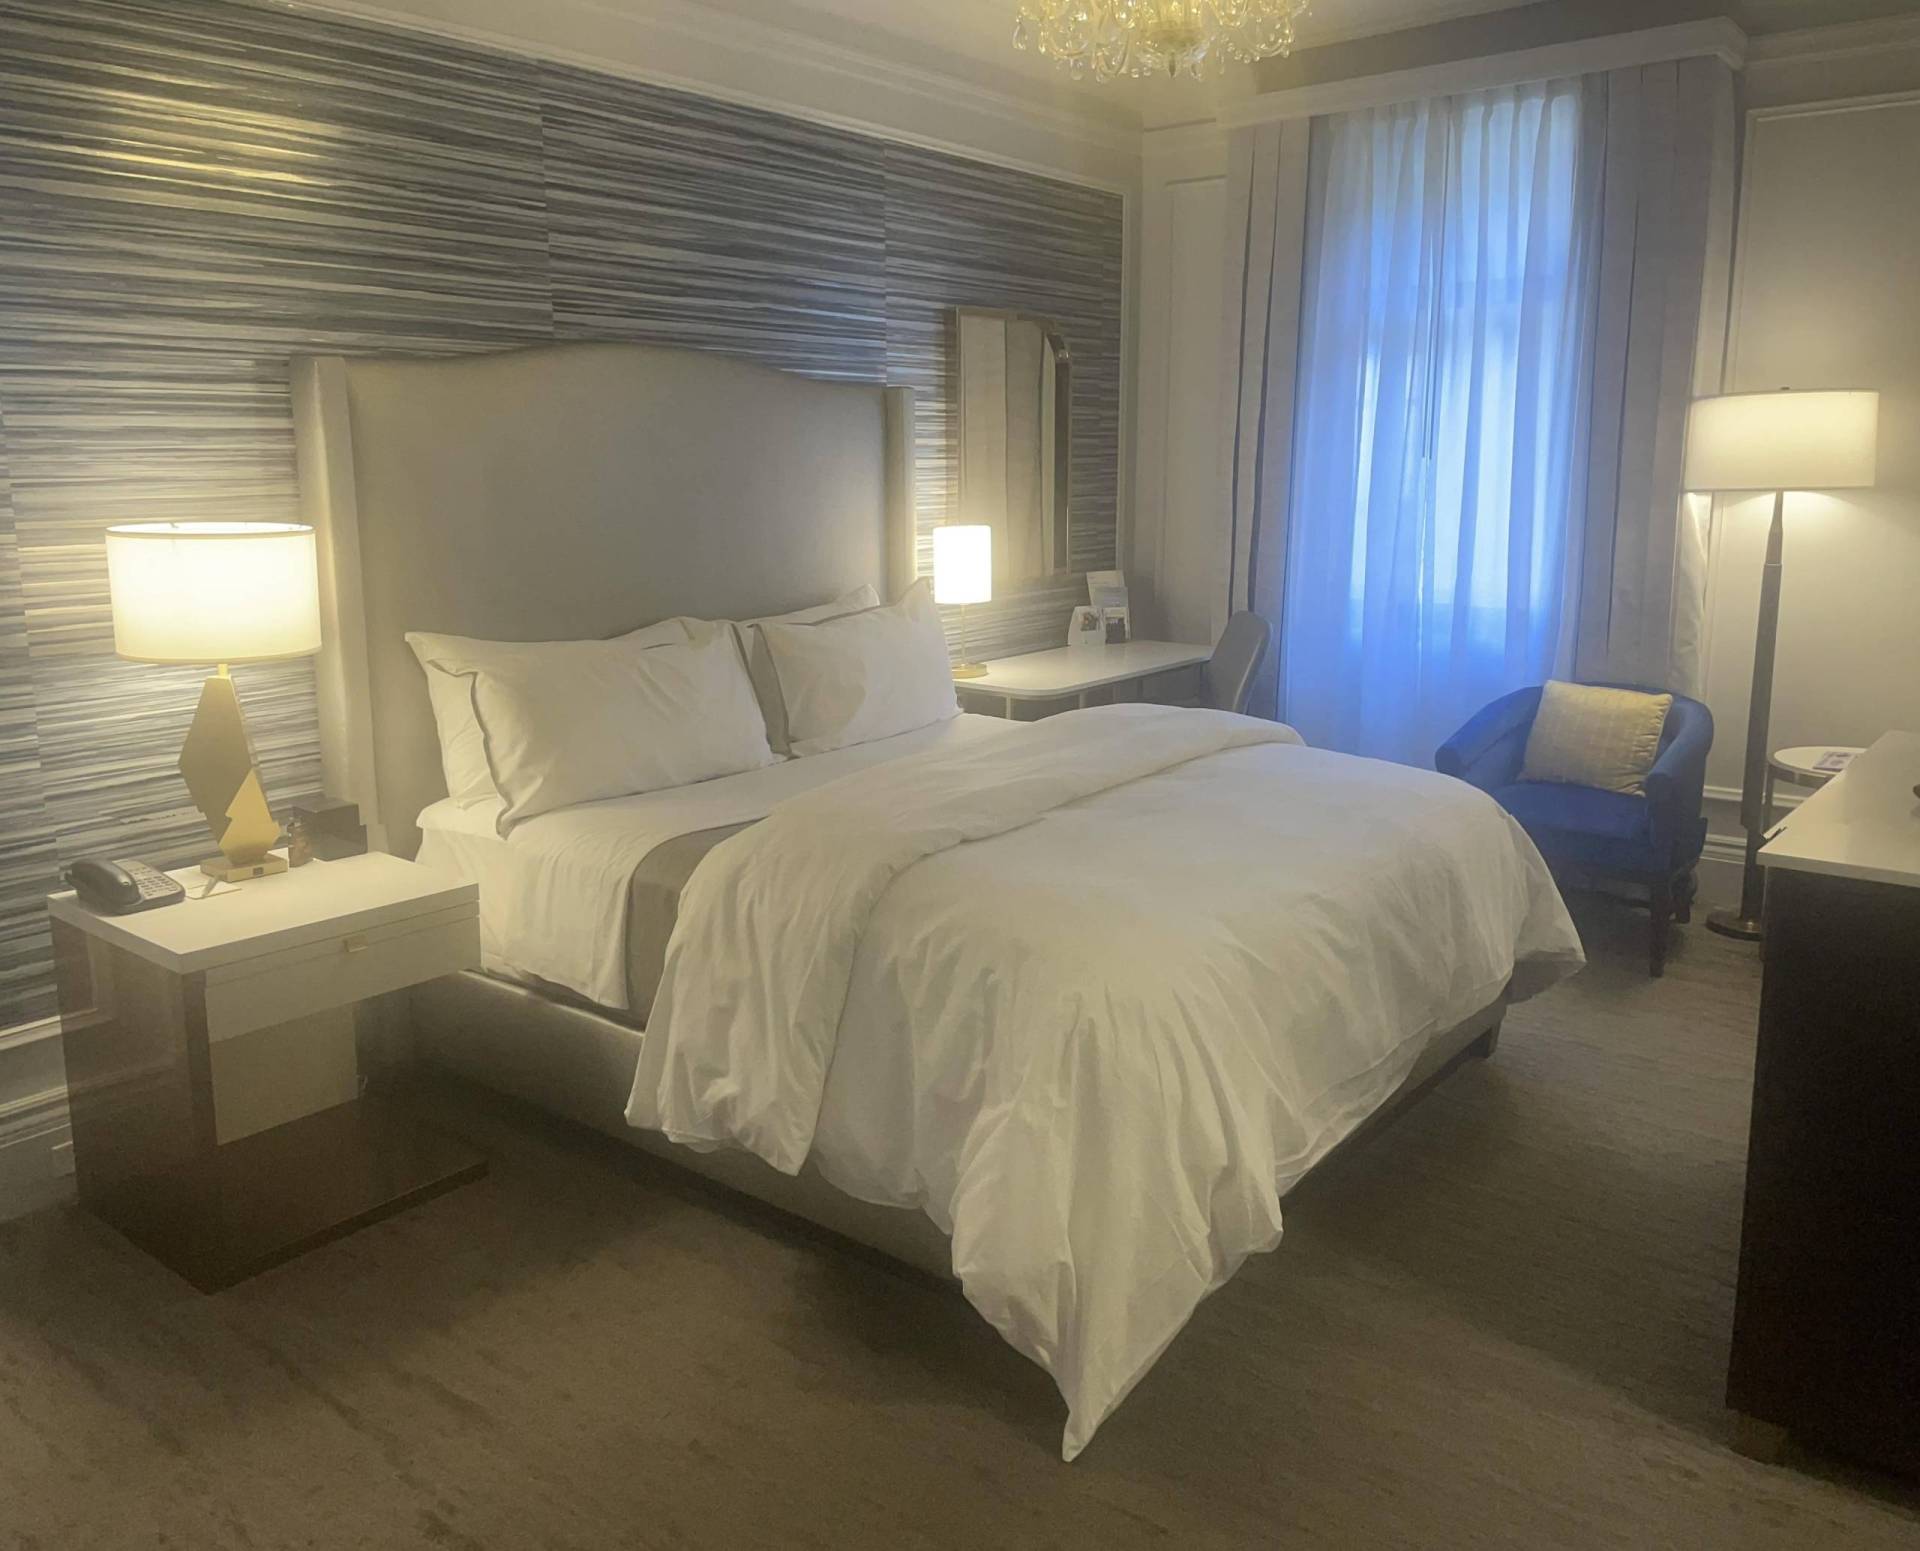 A modern hotel room with a queen sized bed.